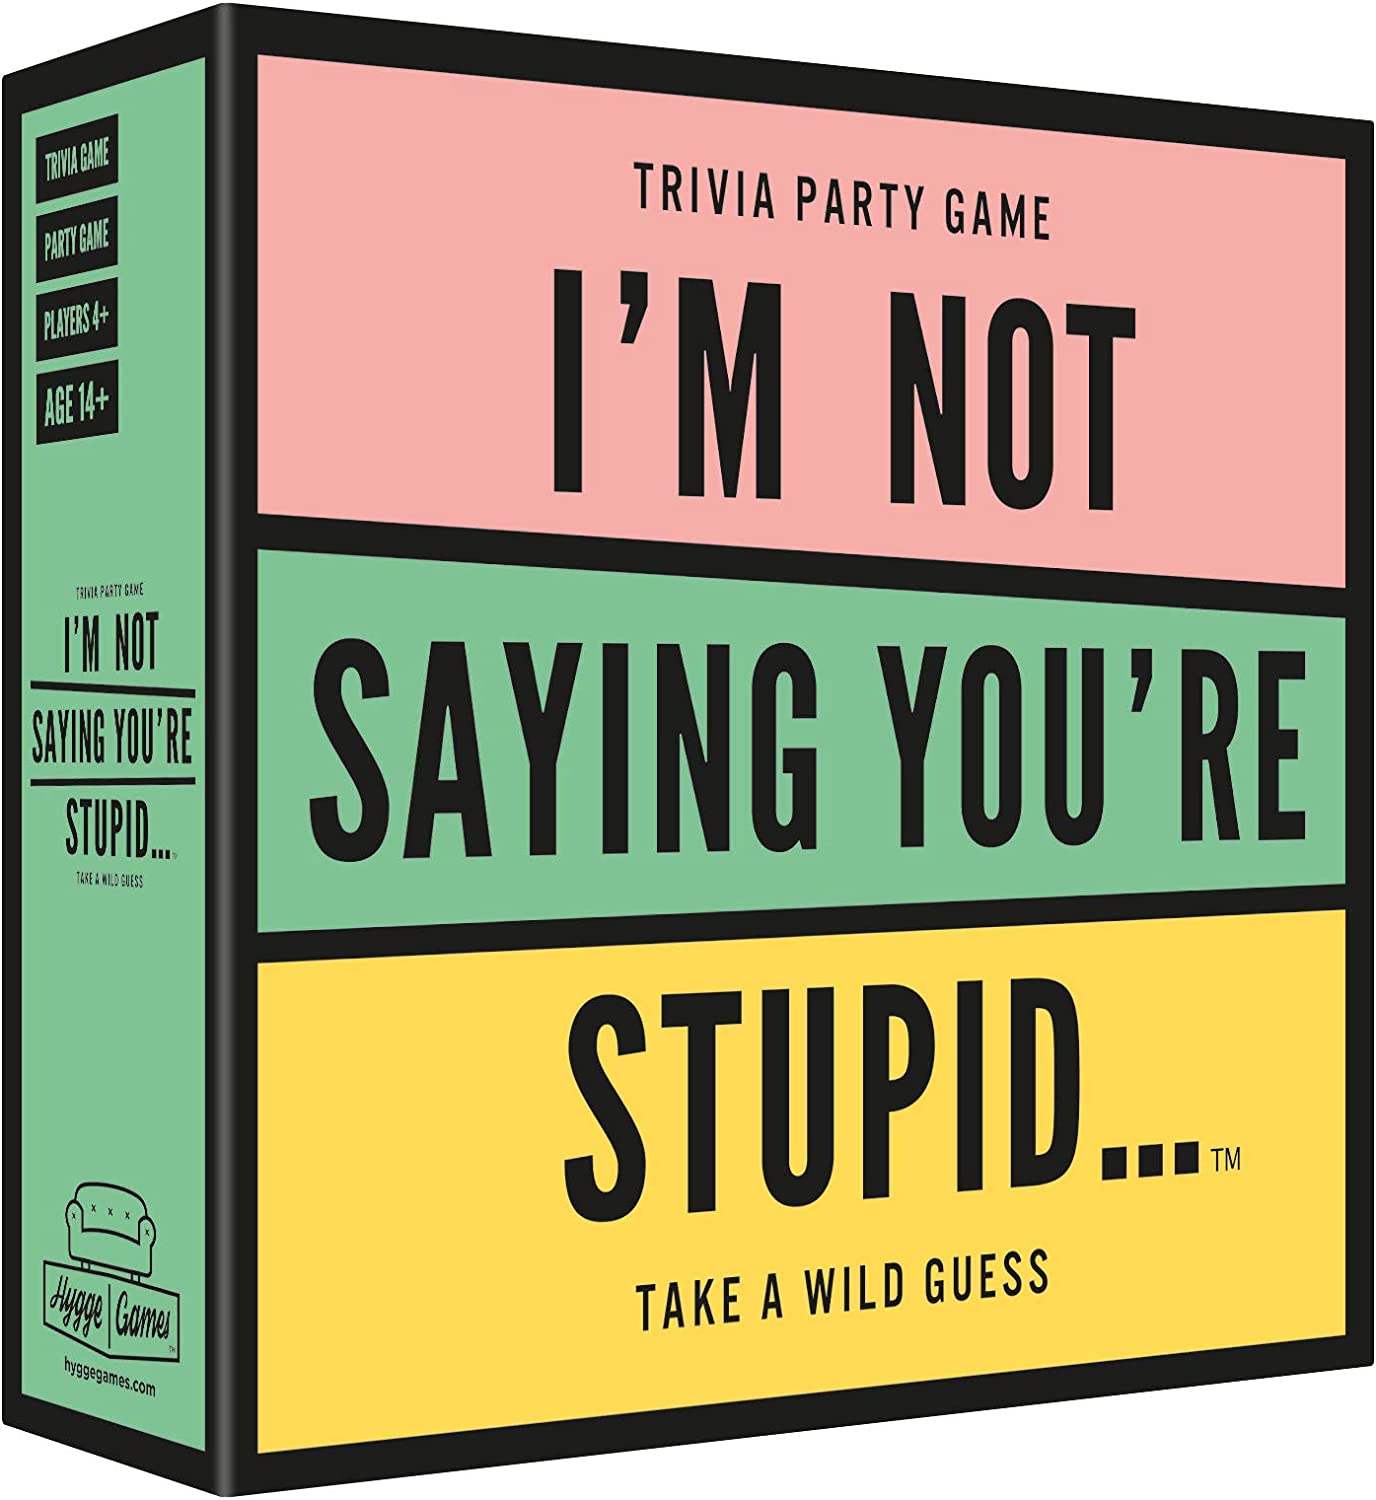 I'm Not Saying You're Stupid… Trivia Party Game